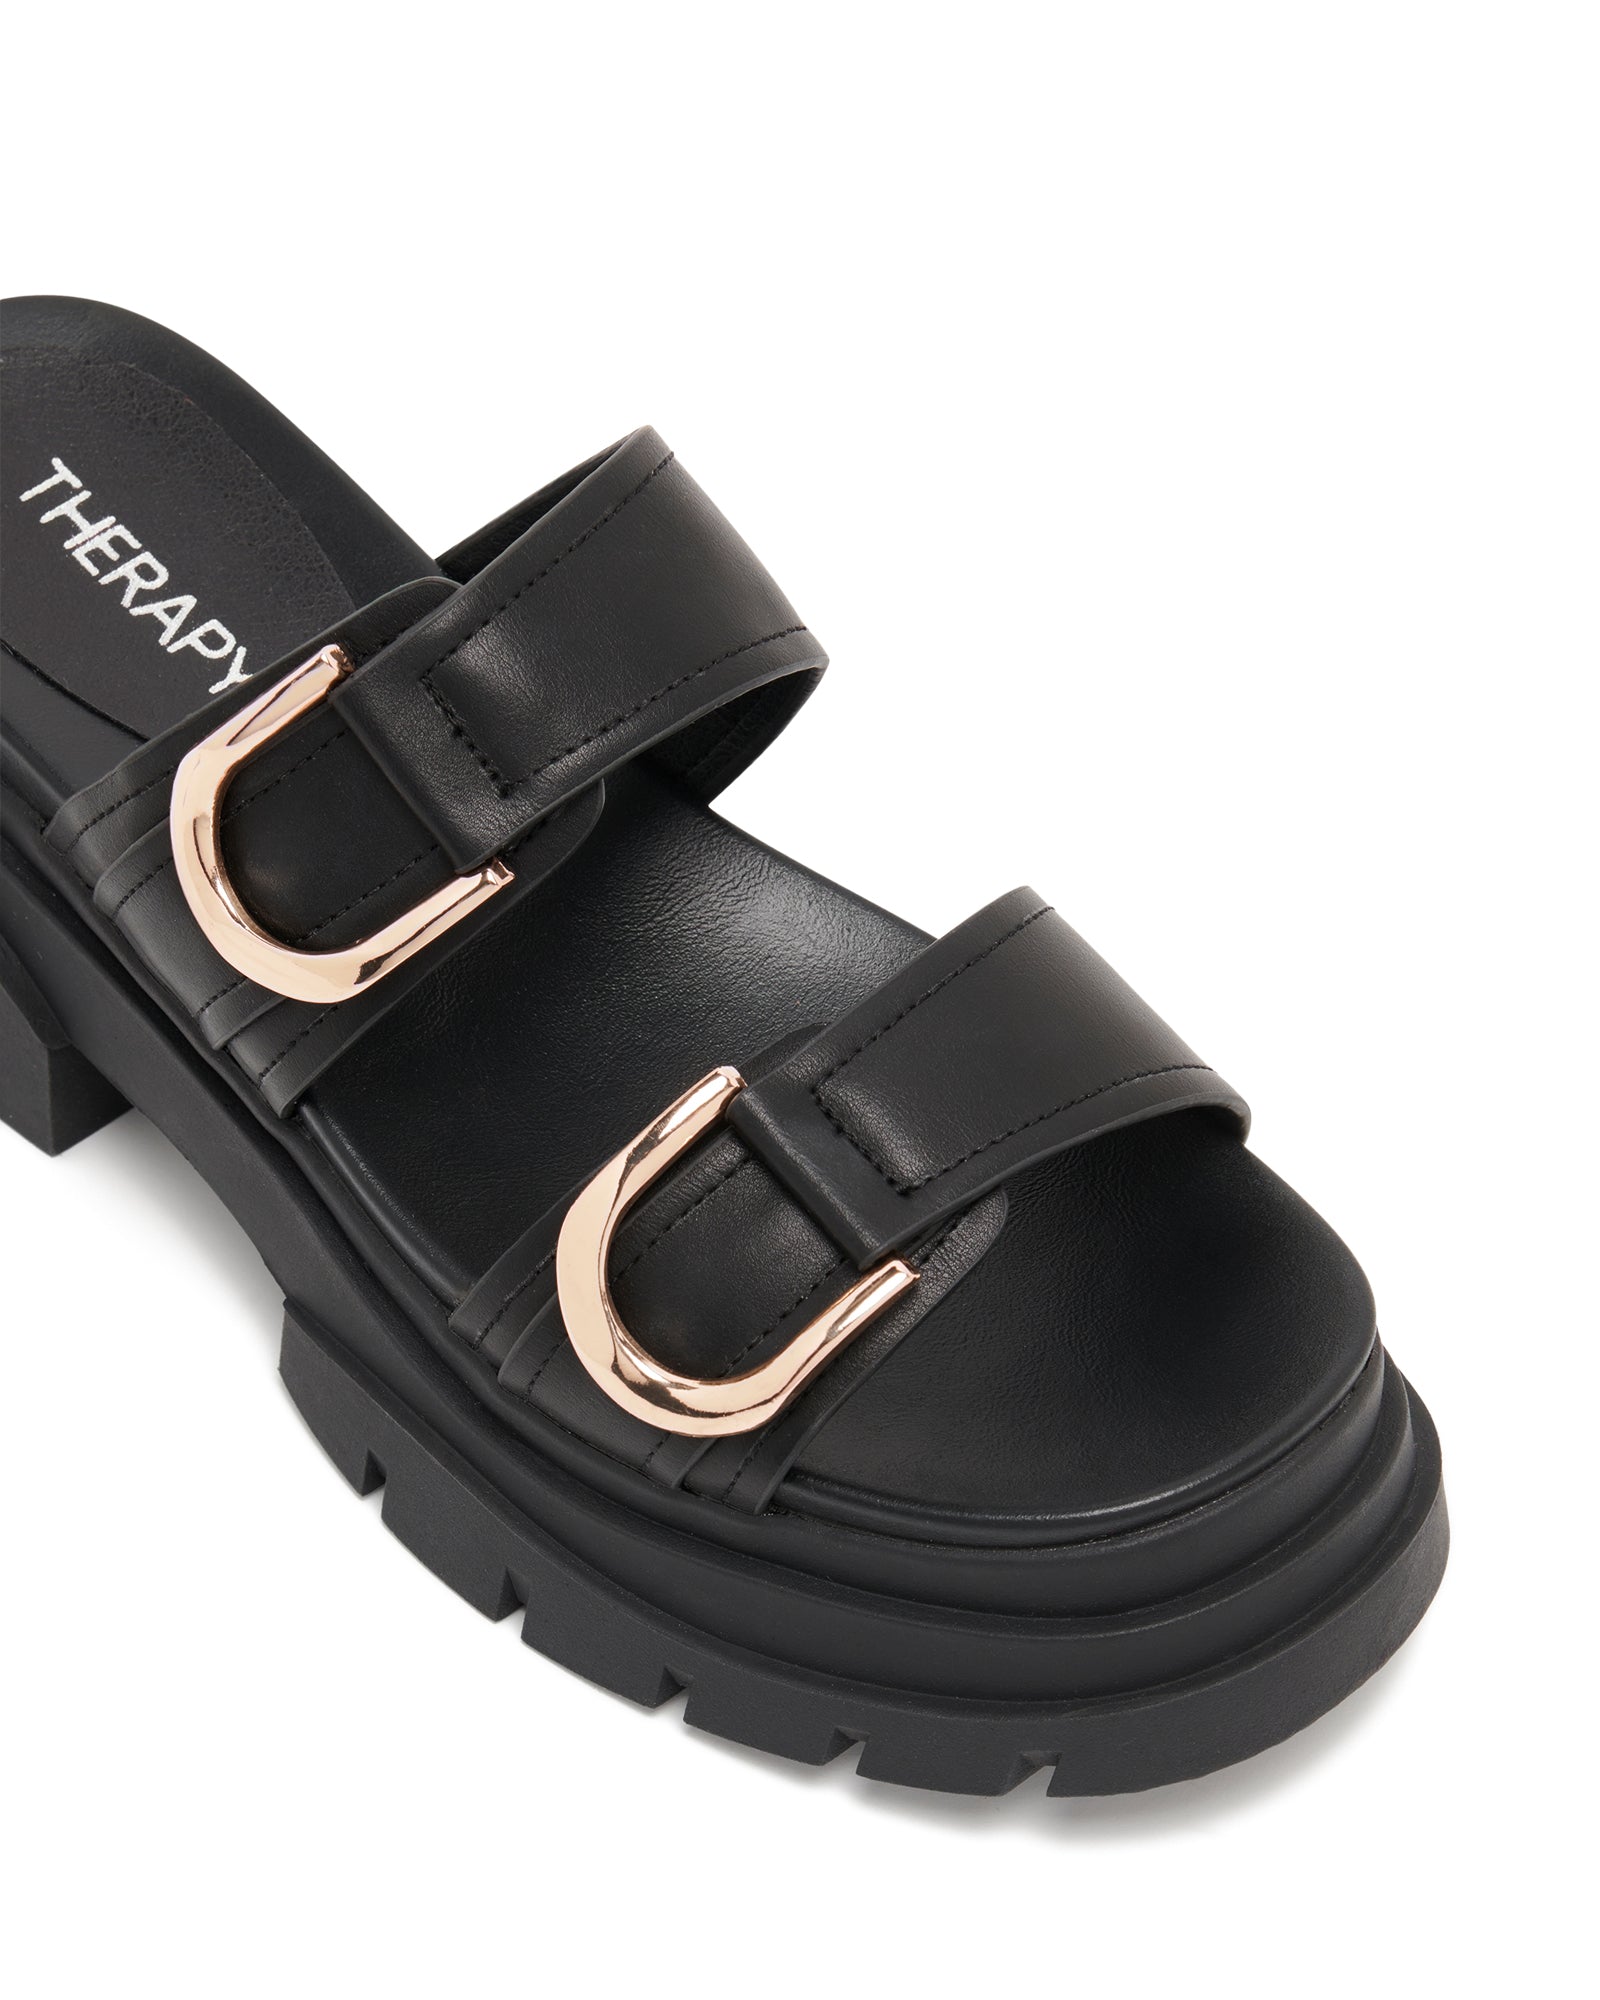 Therapy Shoes Myer Black | Women's Sandals | Slides | Chunky | Flatform